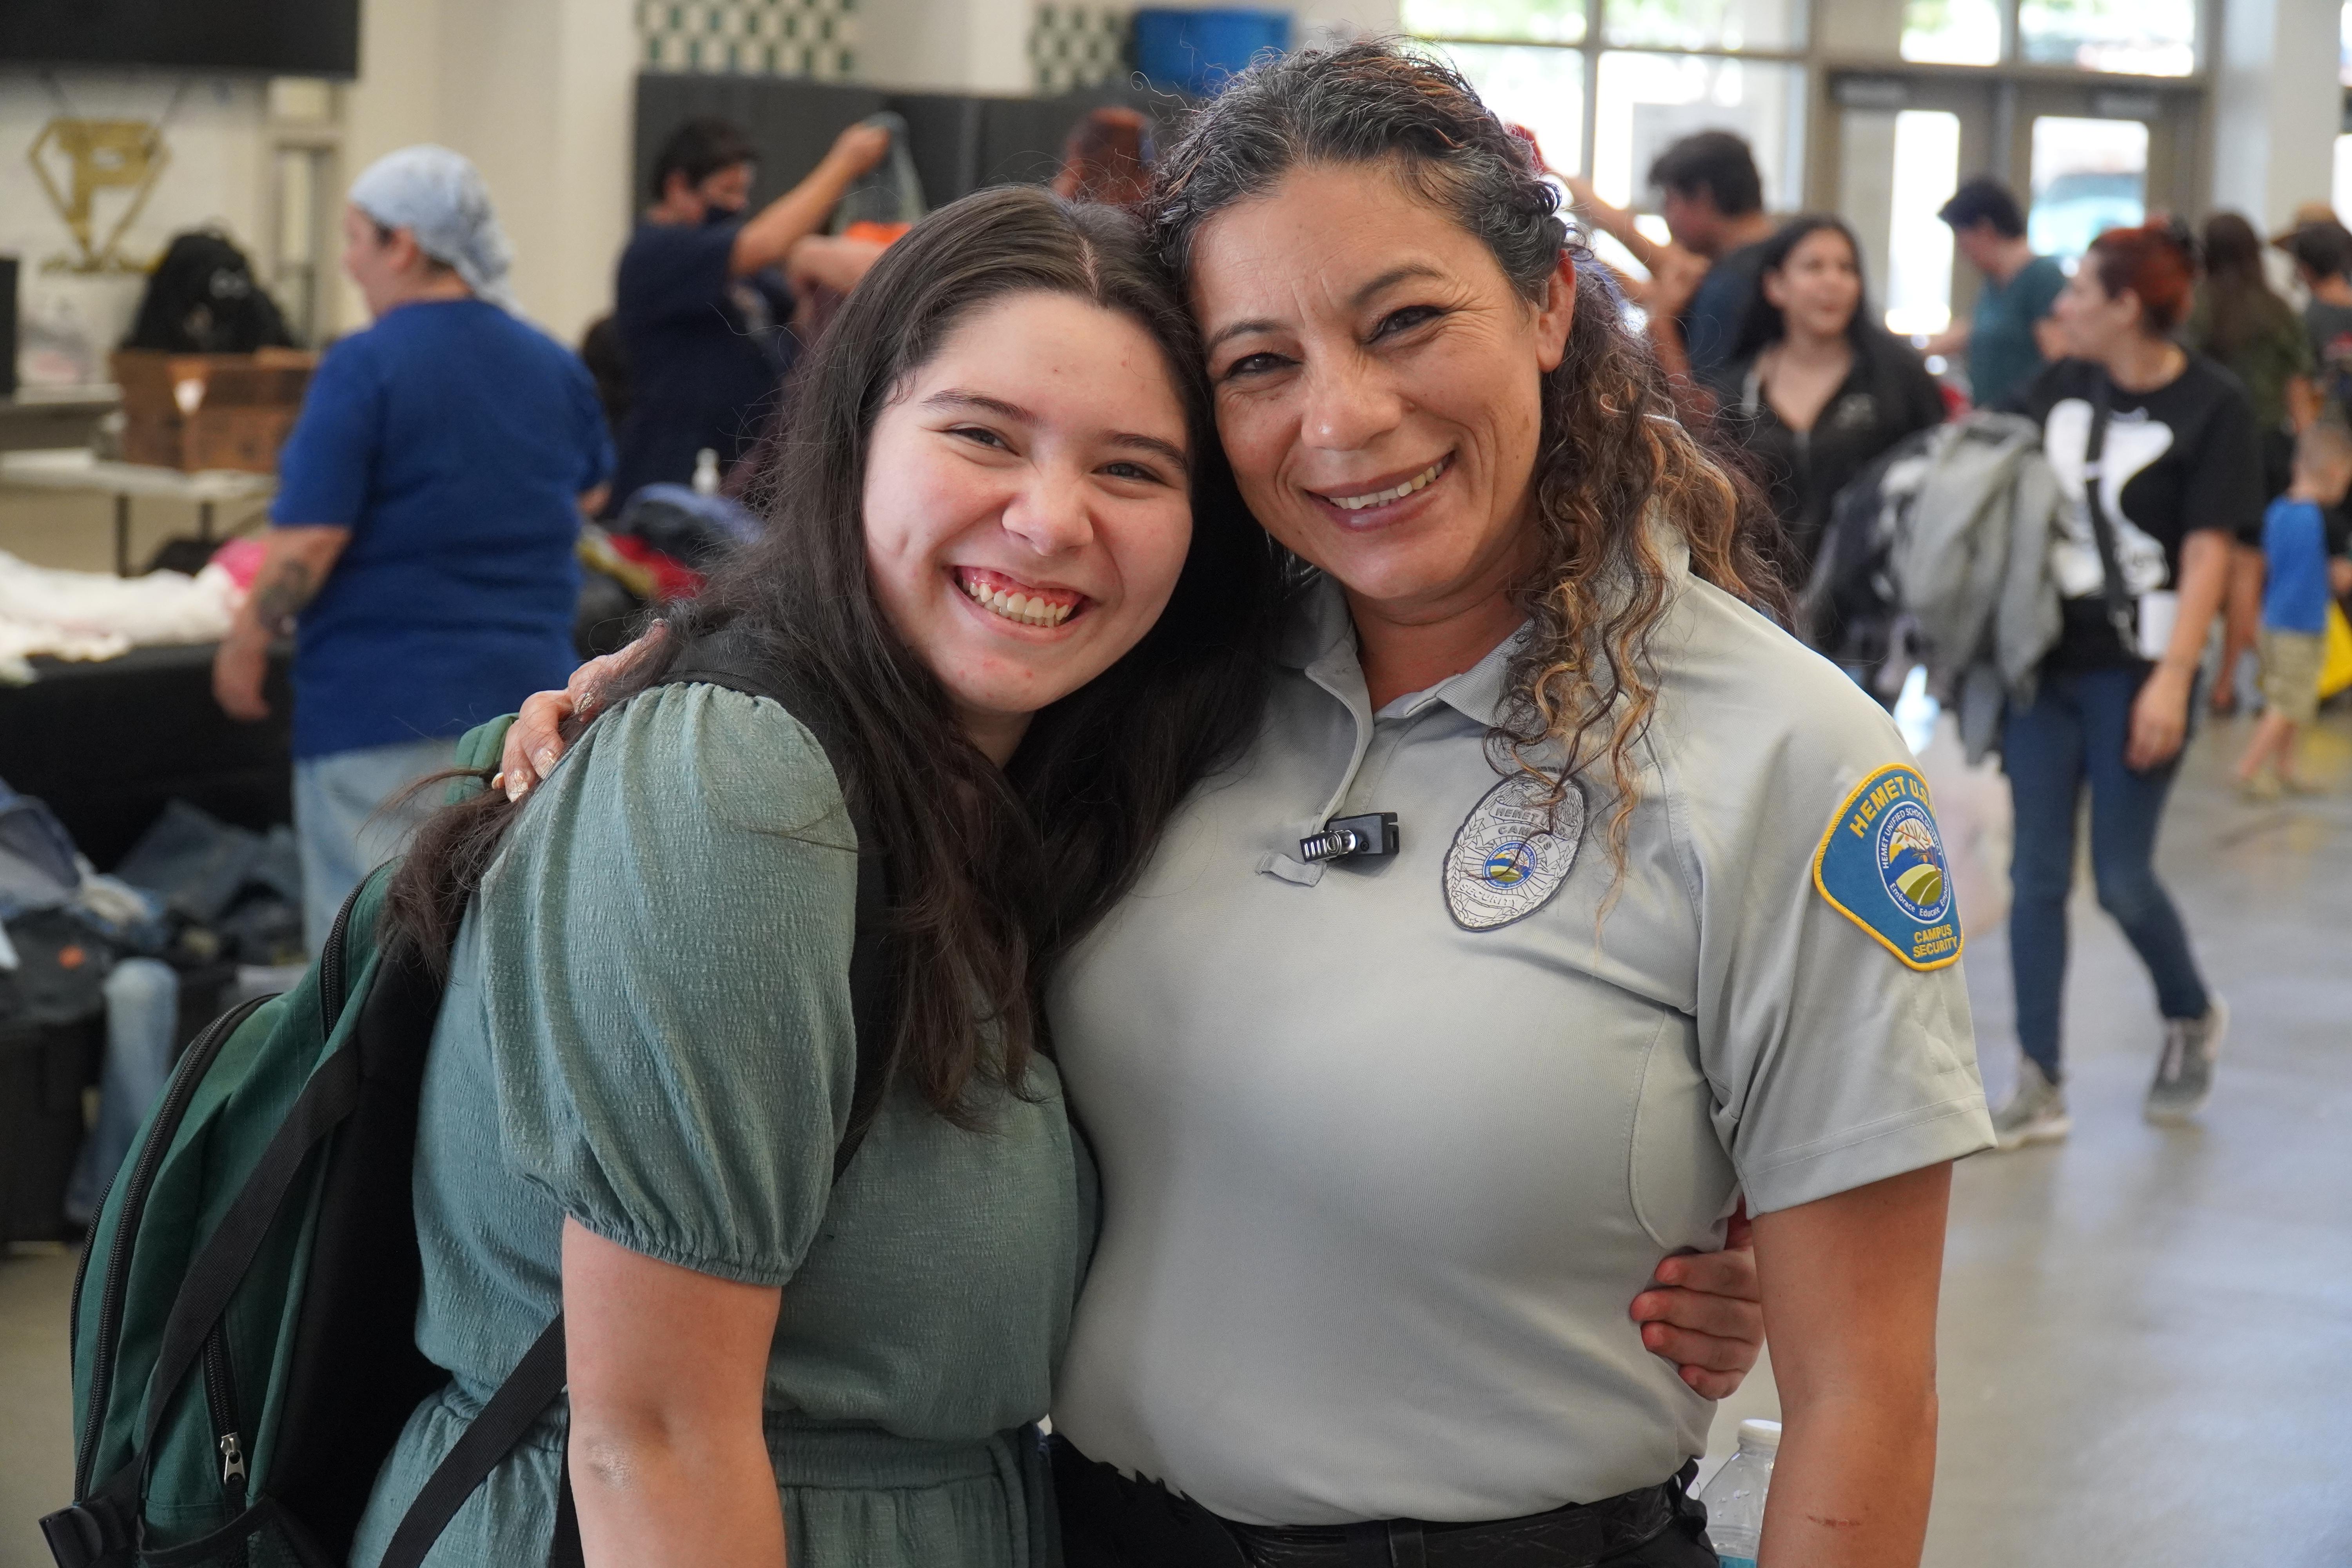 female security guard and student smiling